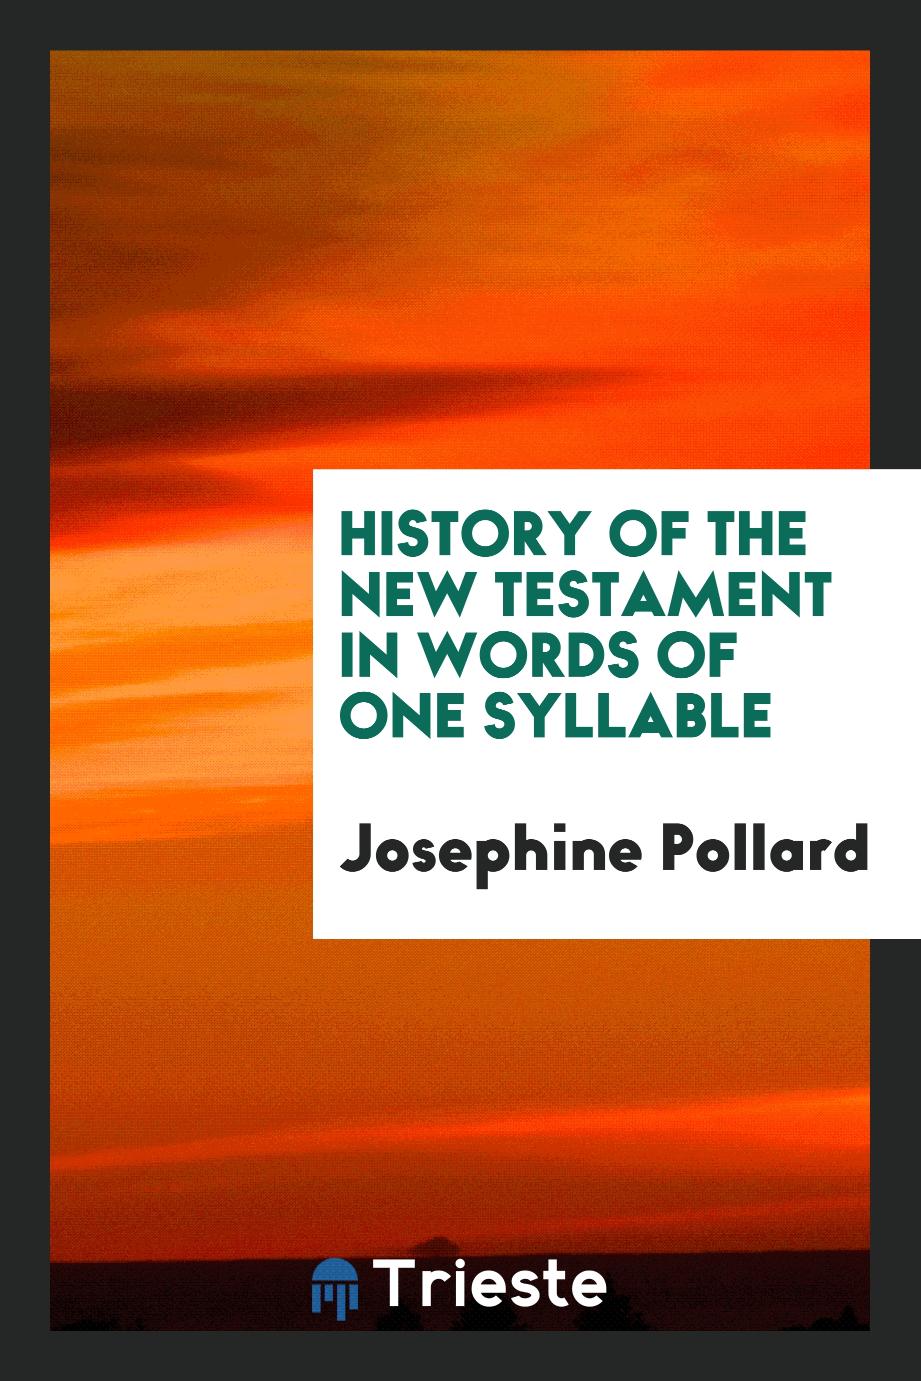 History of the New Testament in Words of One Syllable